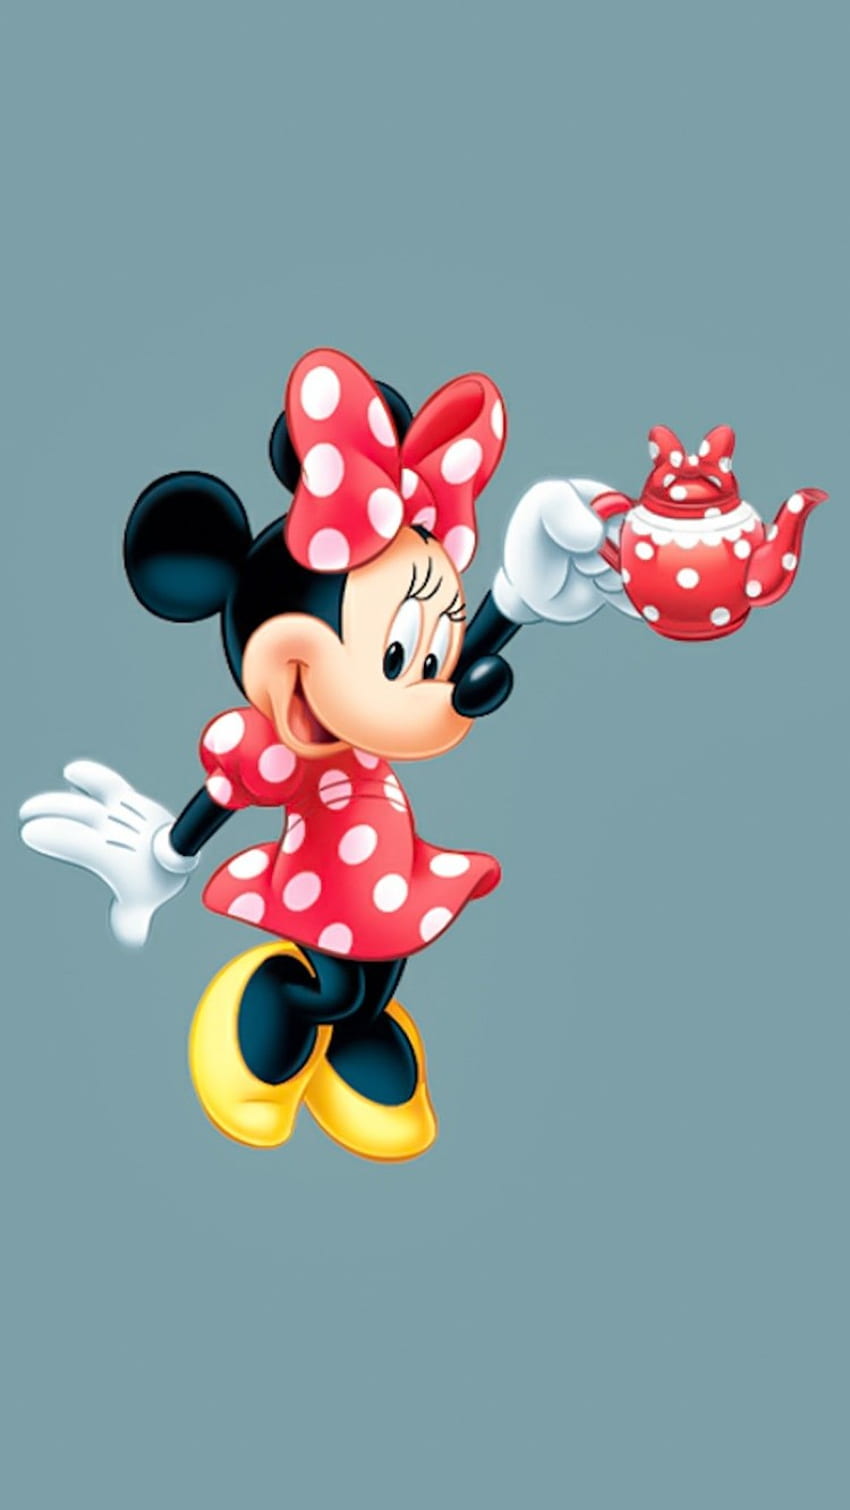 Mickey Mouse 디즈니 Aesthetic : Minnie Mouse Red Polka Dot Dress - Idea , iPhone , Color Scheme, Red Mickey Mouse HD 전화 배경 화면